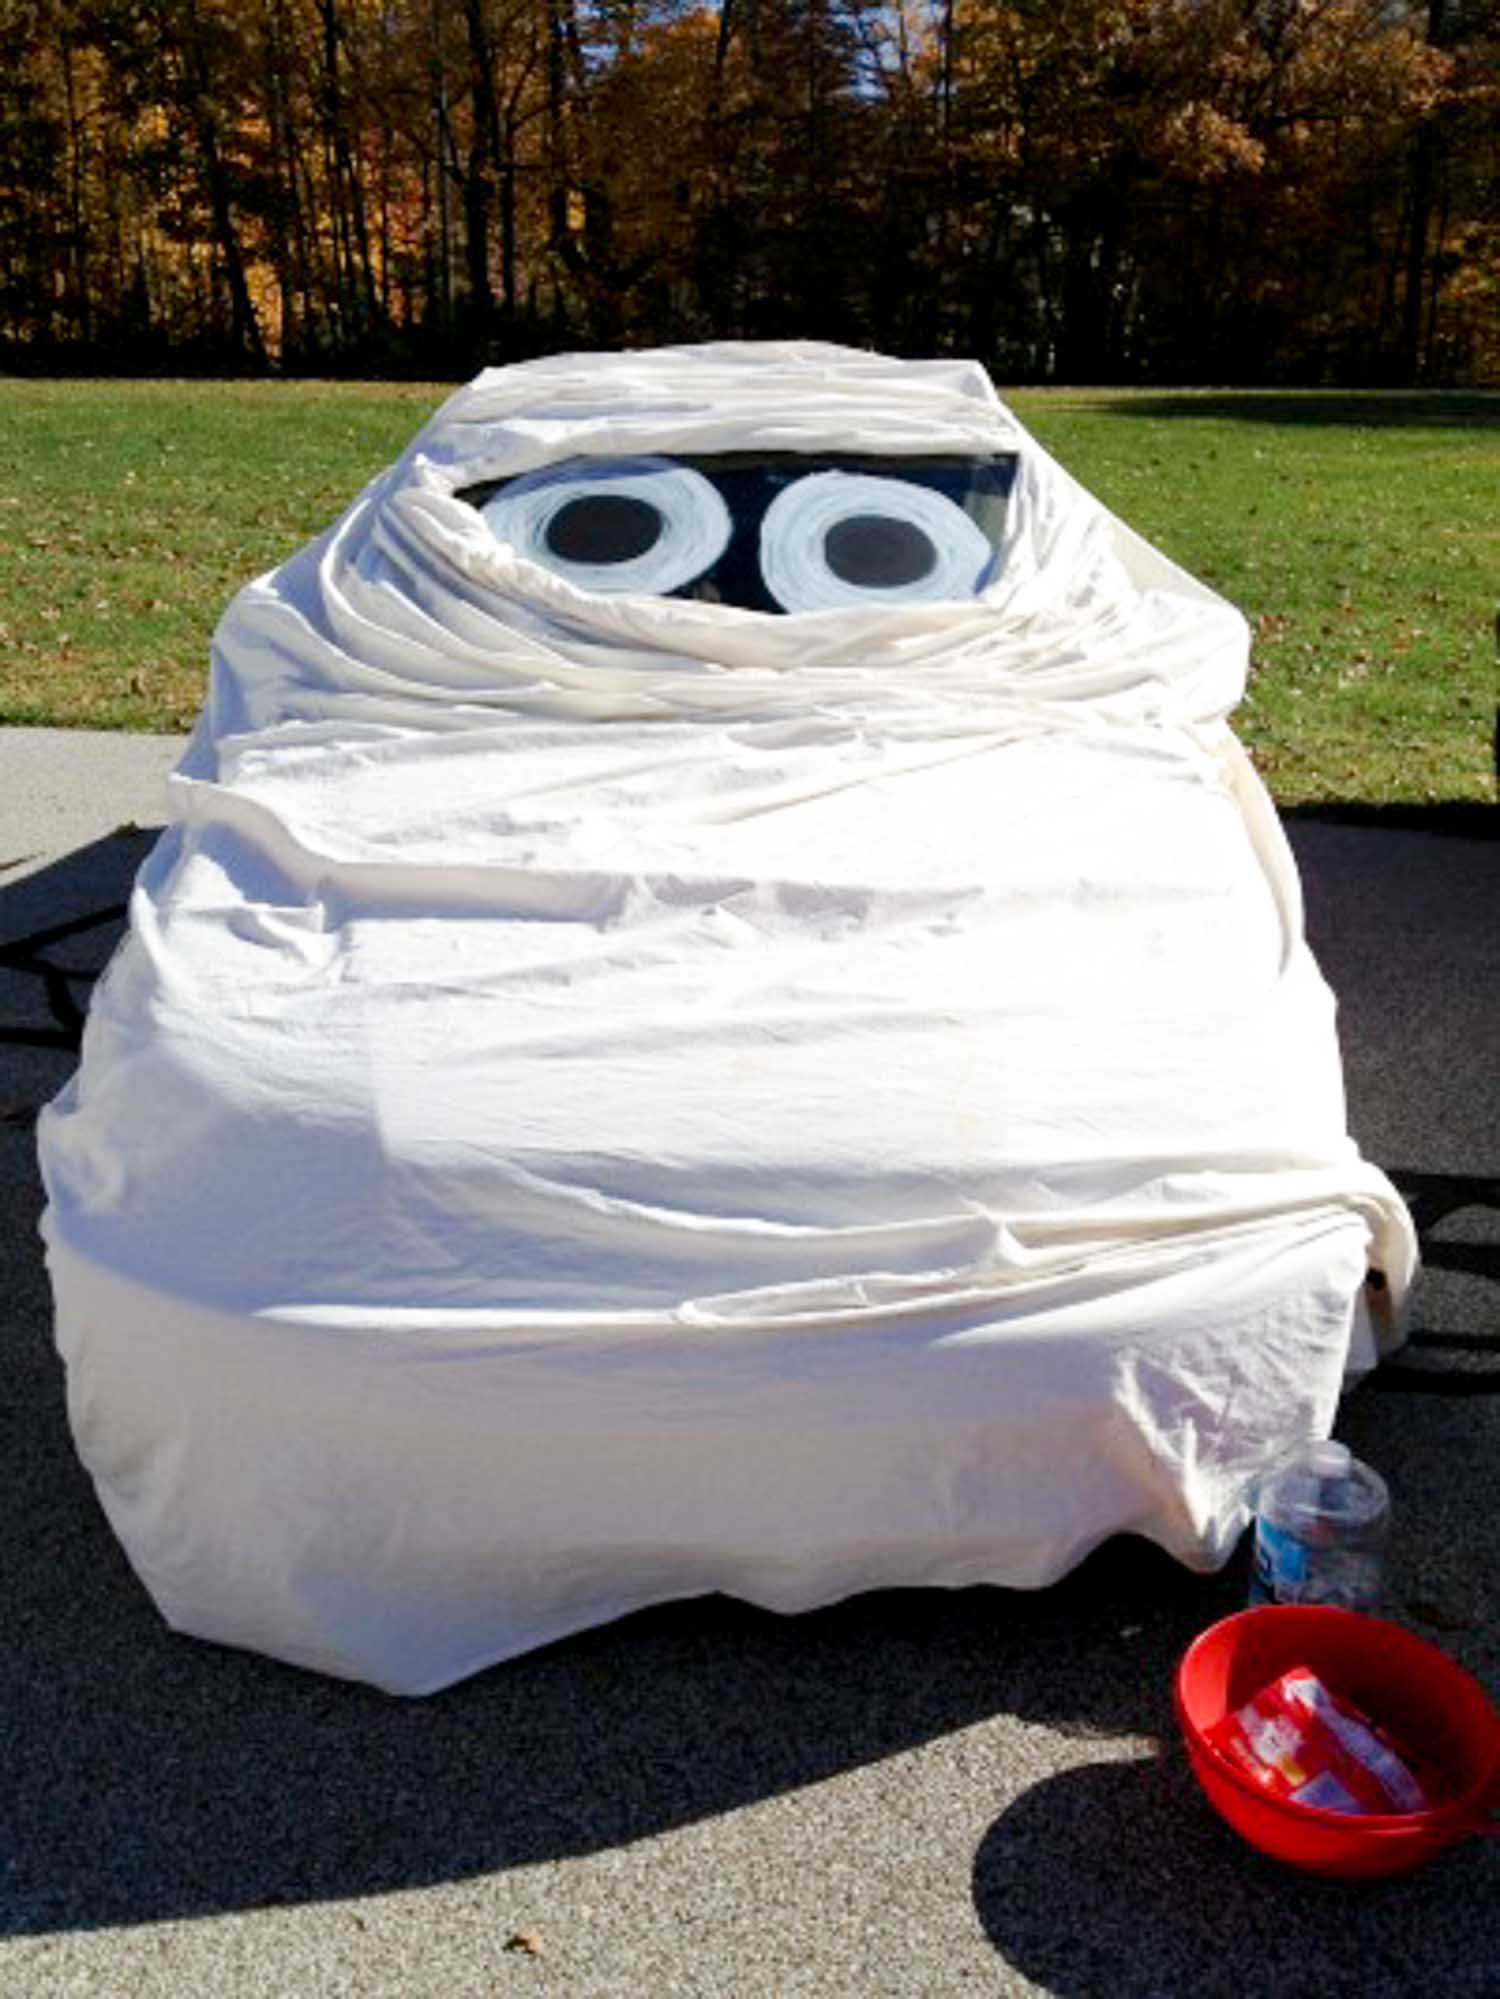 A car wrapped in a white sheet and eyes on the windshield with a bowl of candy next to it.